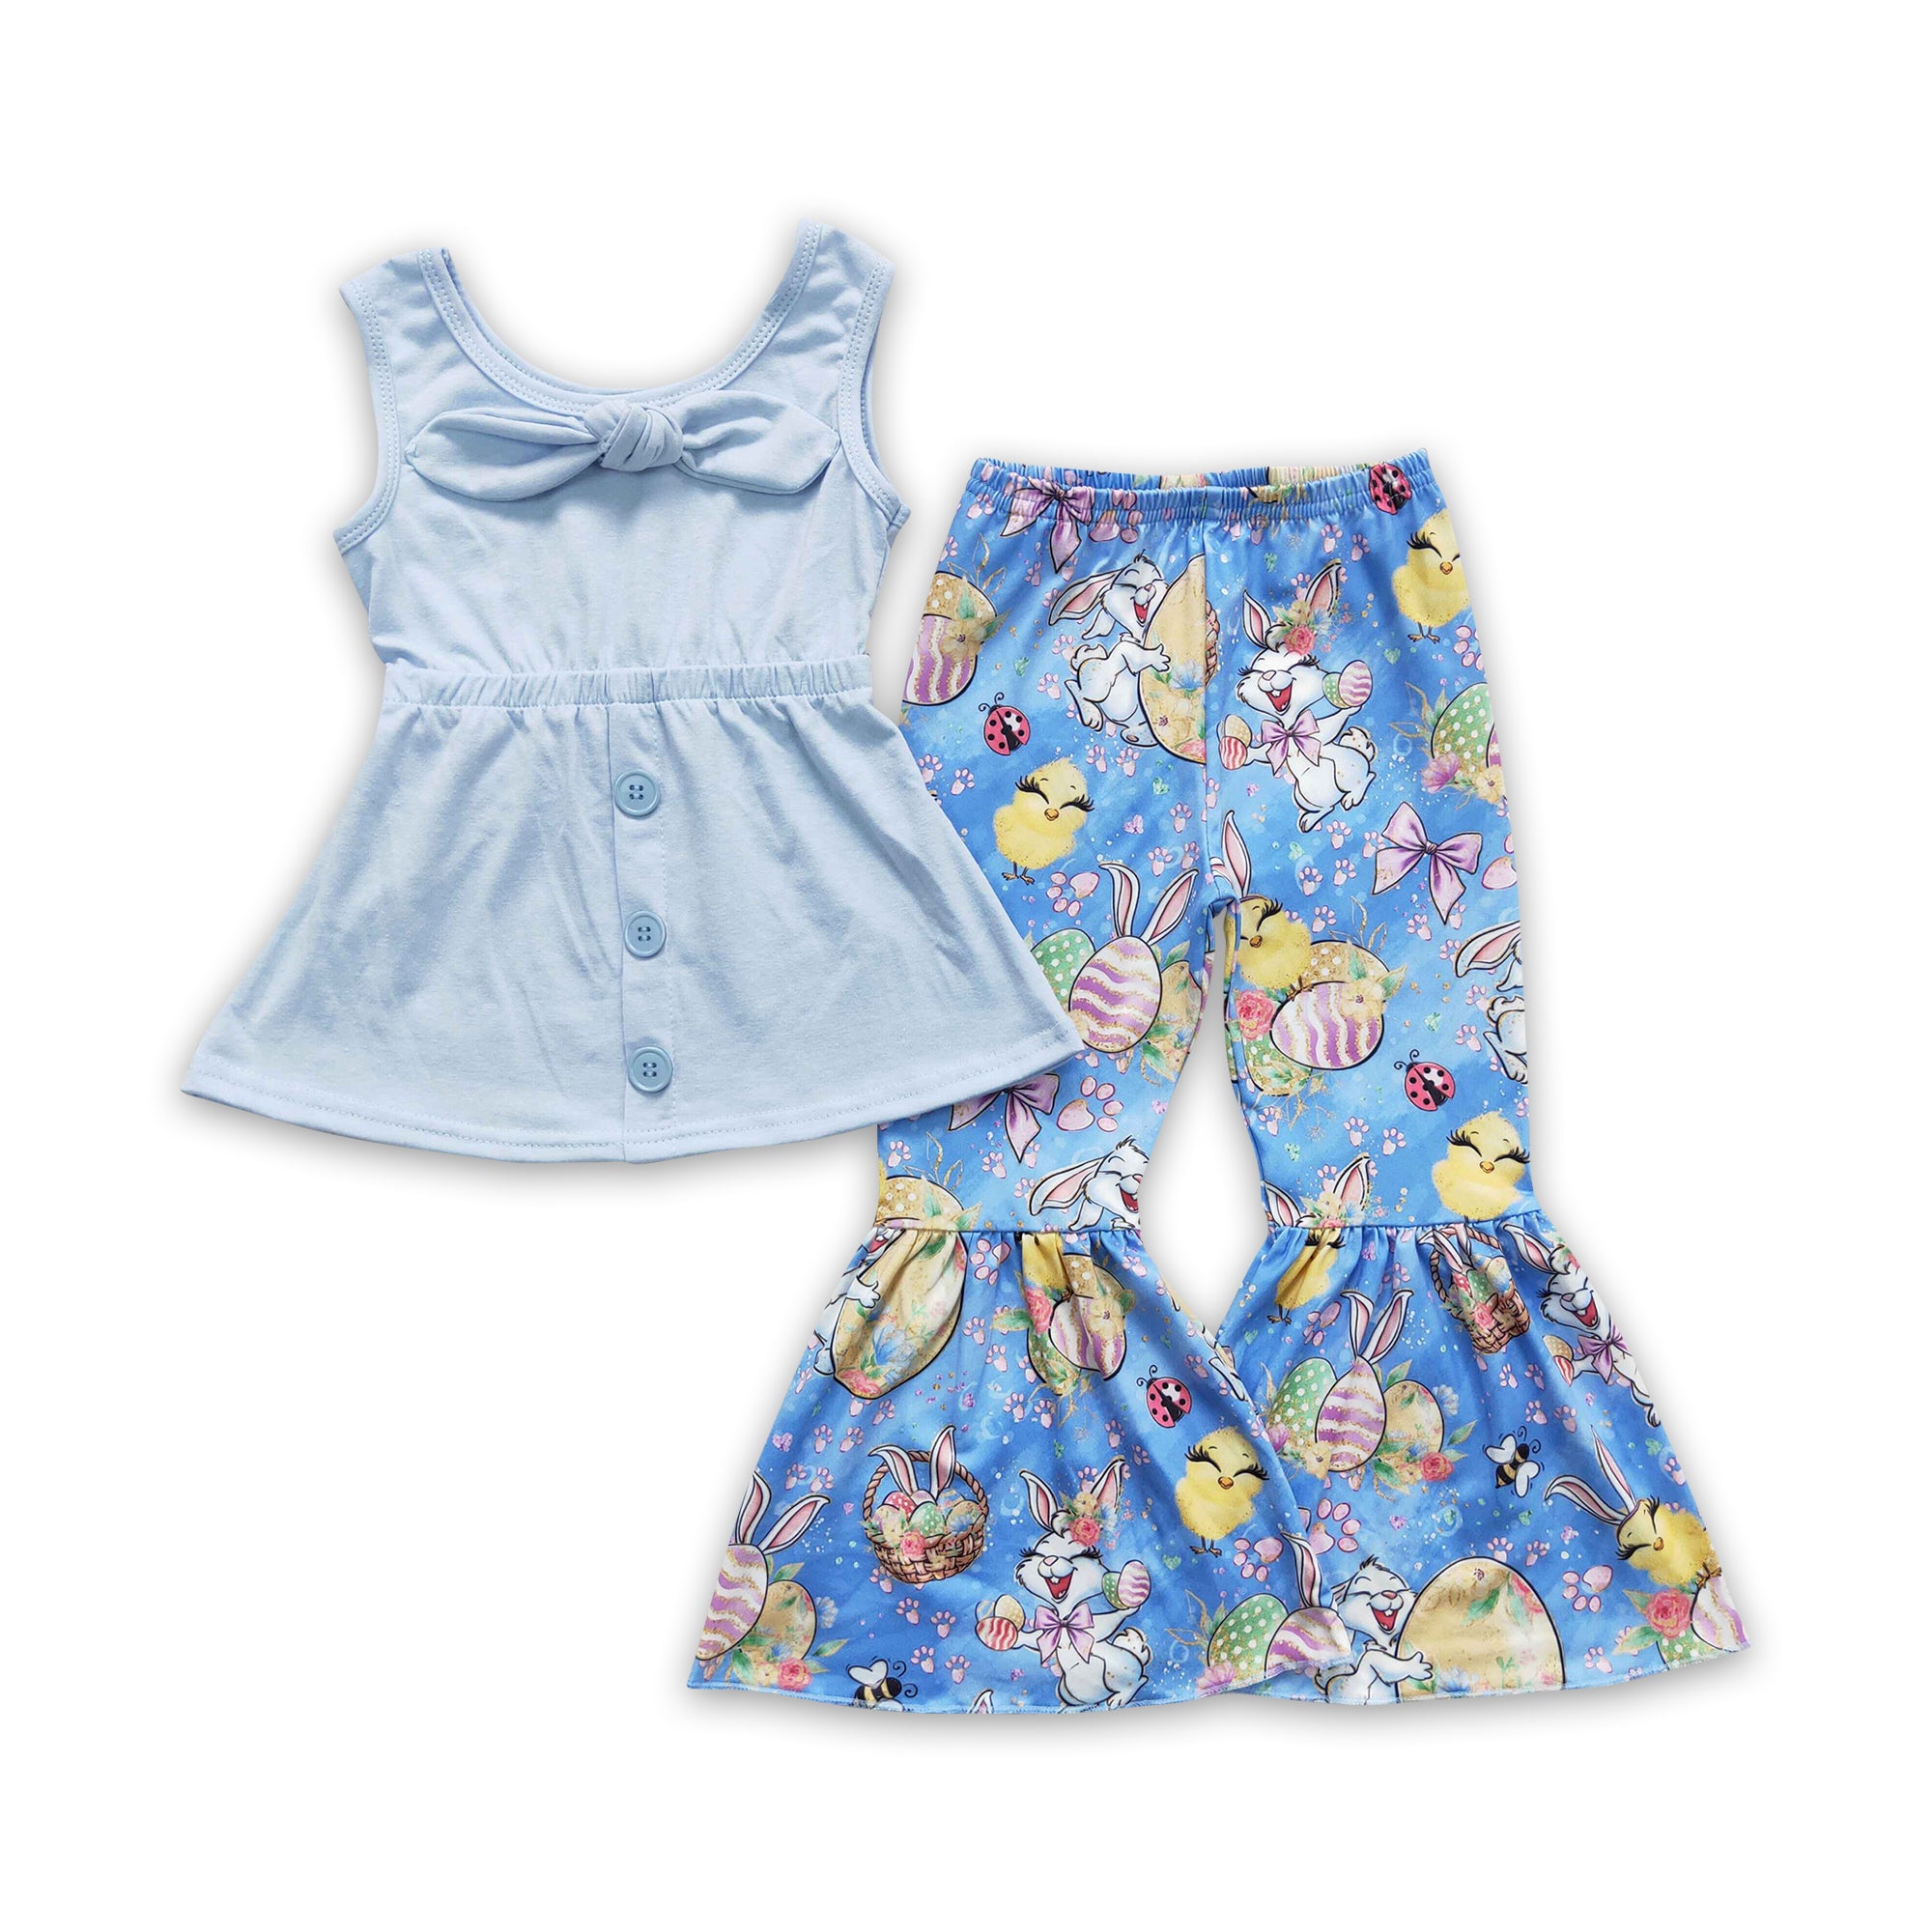 GSPO0233 baby girl clothes blue bunny easter set